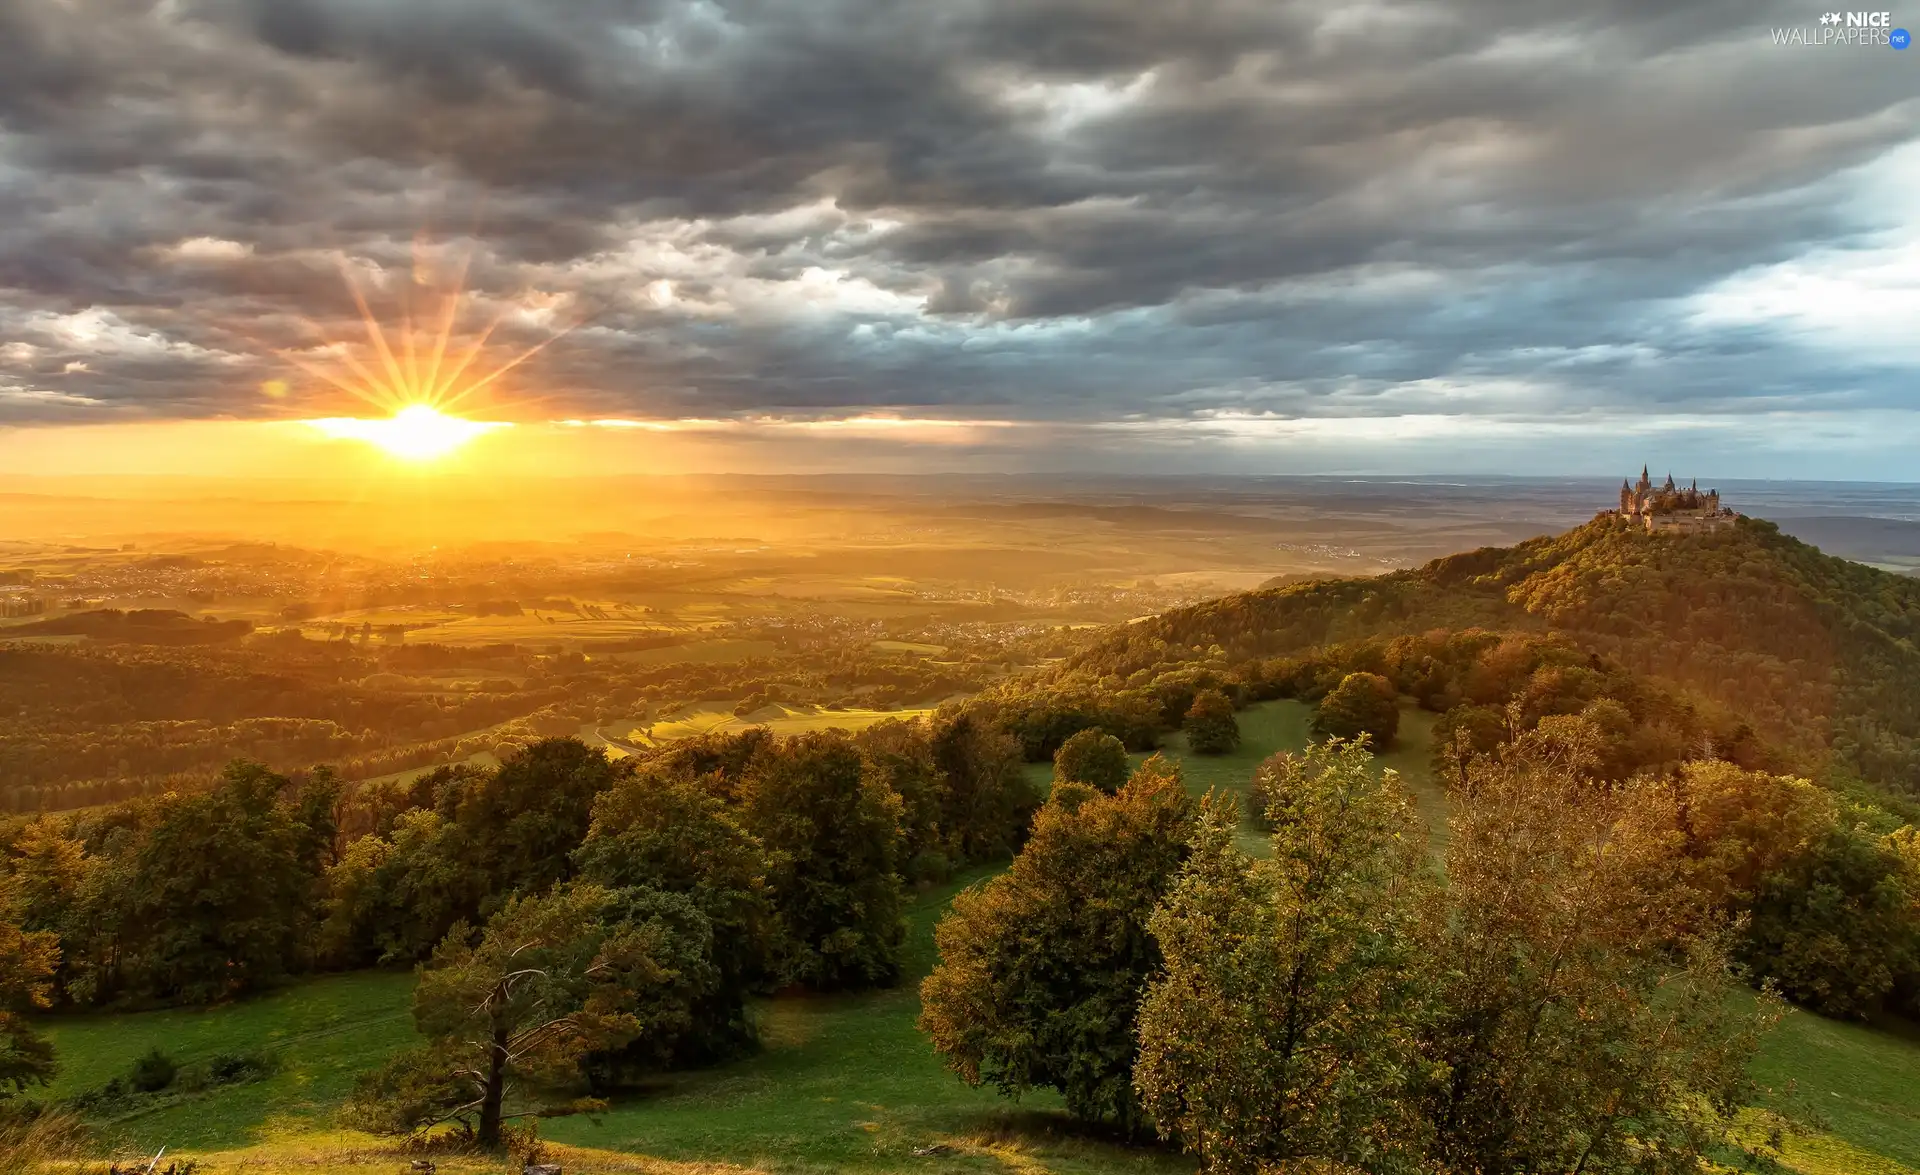 Hohenzollern Castle, Hohenzollern Mountain, trees, viewes, Baden-Württemberg, Germany, clouds, The Hills, Sunrise